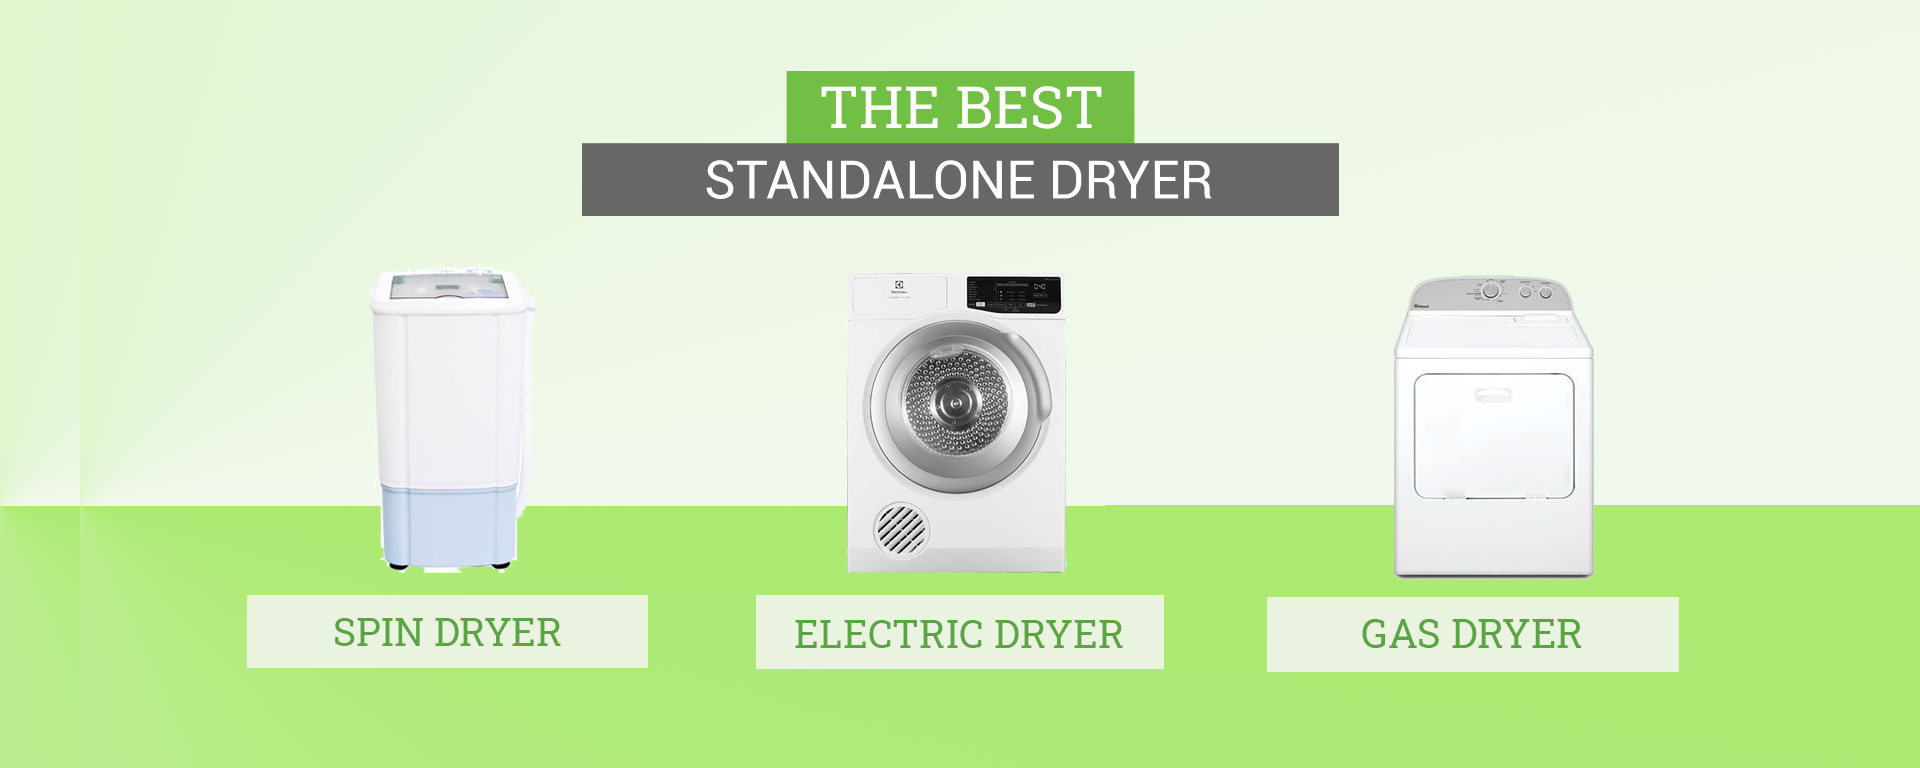 The Best Standalone Dryer Philippines